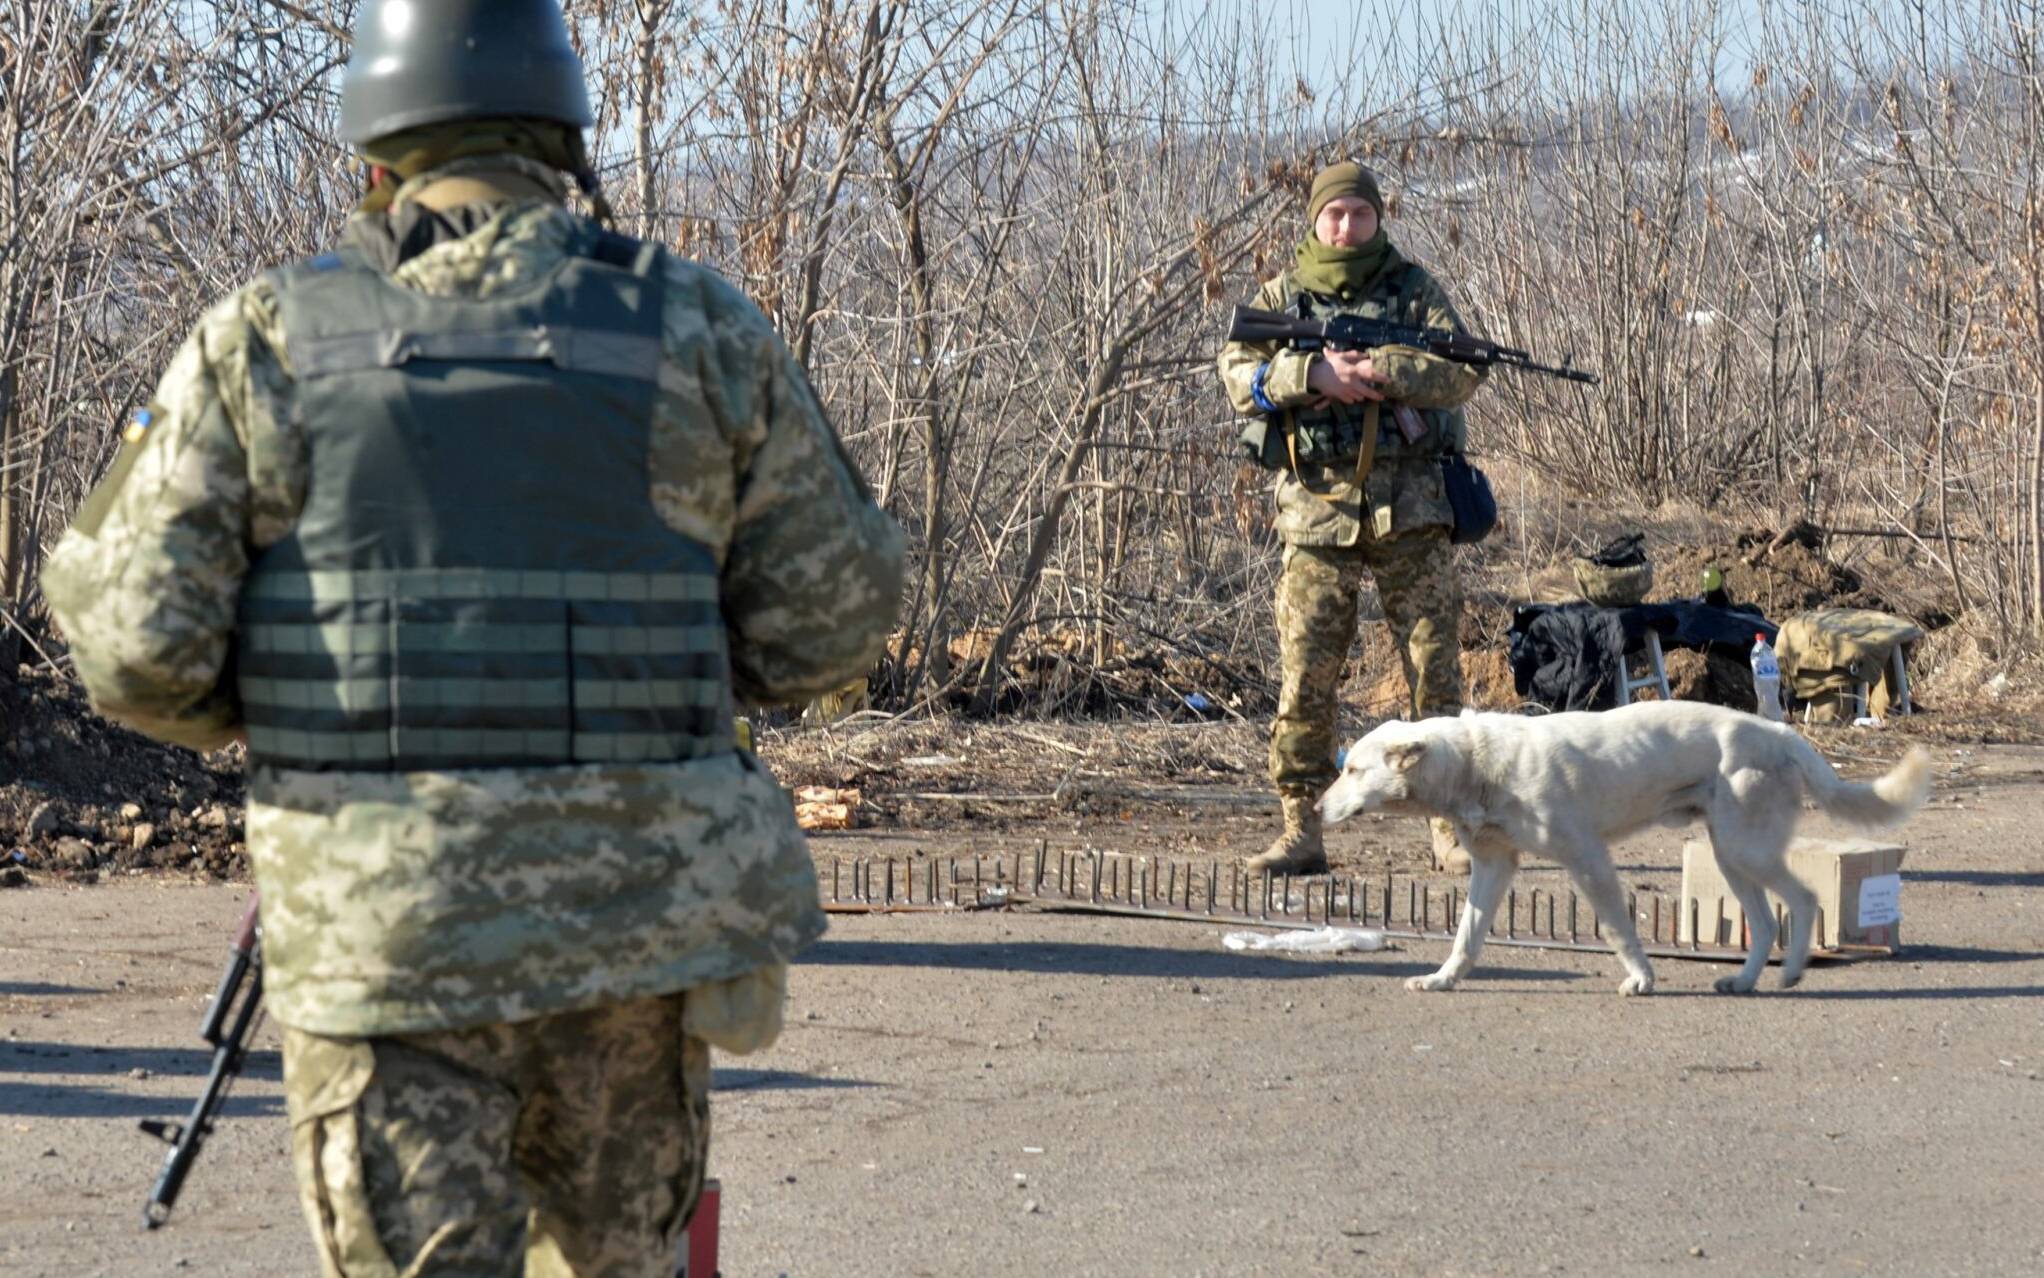 Servicemen of Ukrainian military forces stand guard at a checkpoint where they hold a position near Kharkiv on March 23, 2022. (Photo by Sergey BOBOK / AFP)